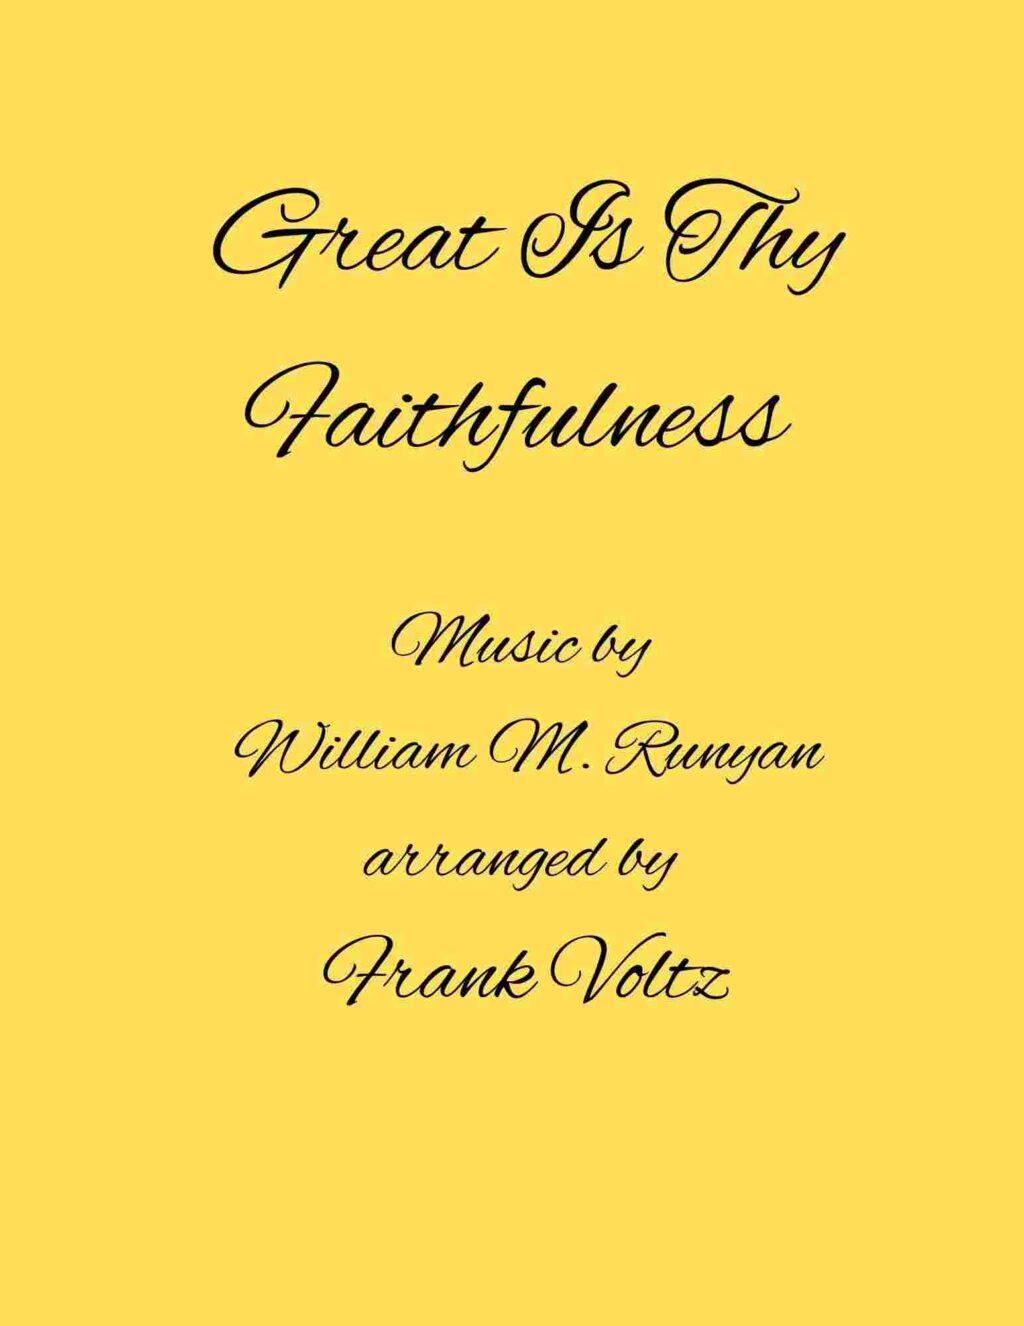 Great Is Thy Faithfulness by Voltz Cover at folkharp.com